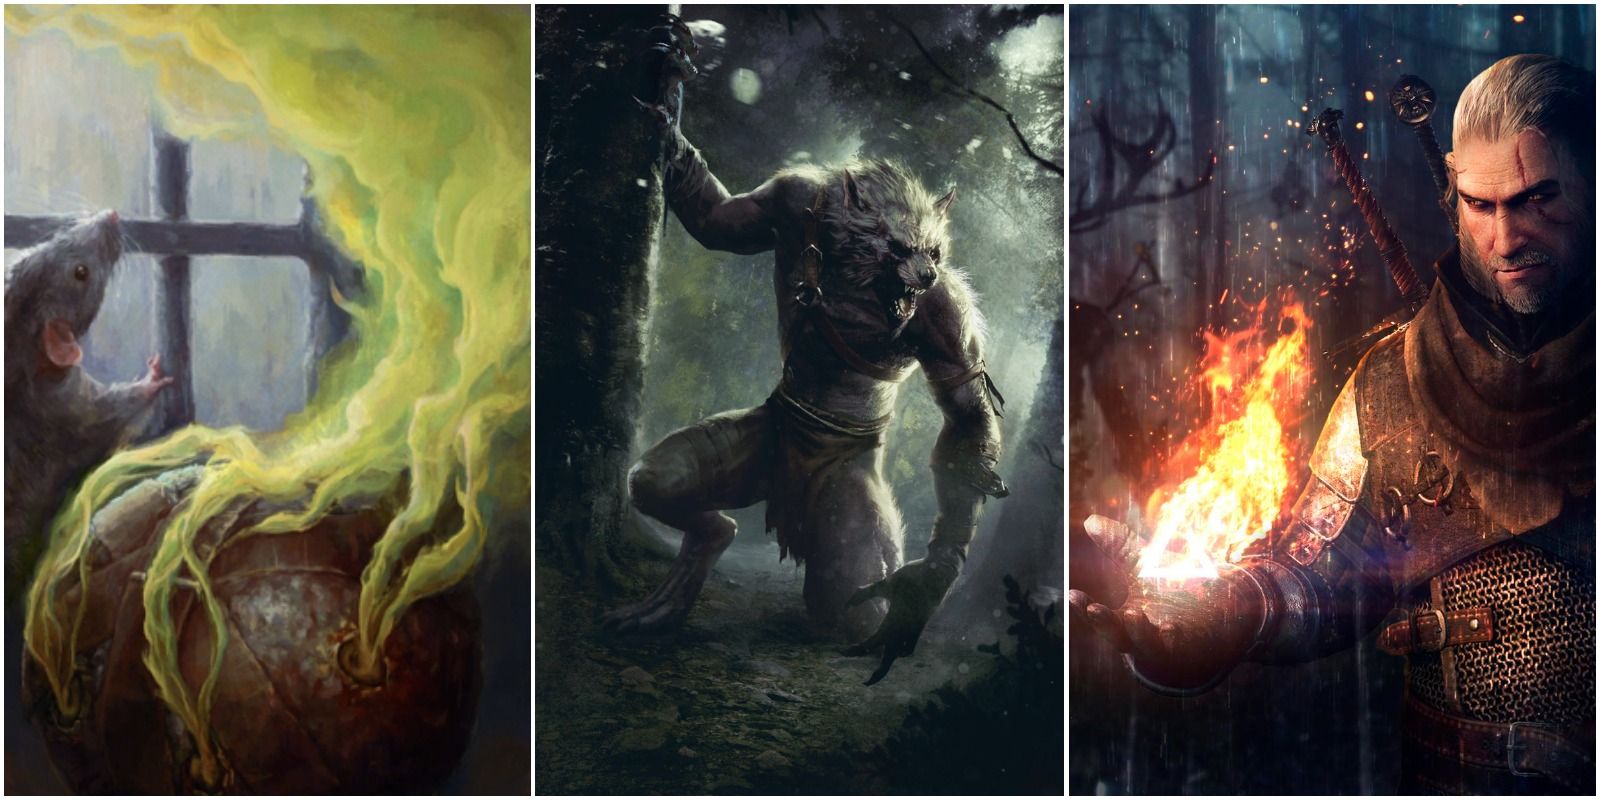 devil's puffball gwent card art, morkvarg gwent card art, and geralt using igni sign.